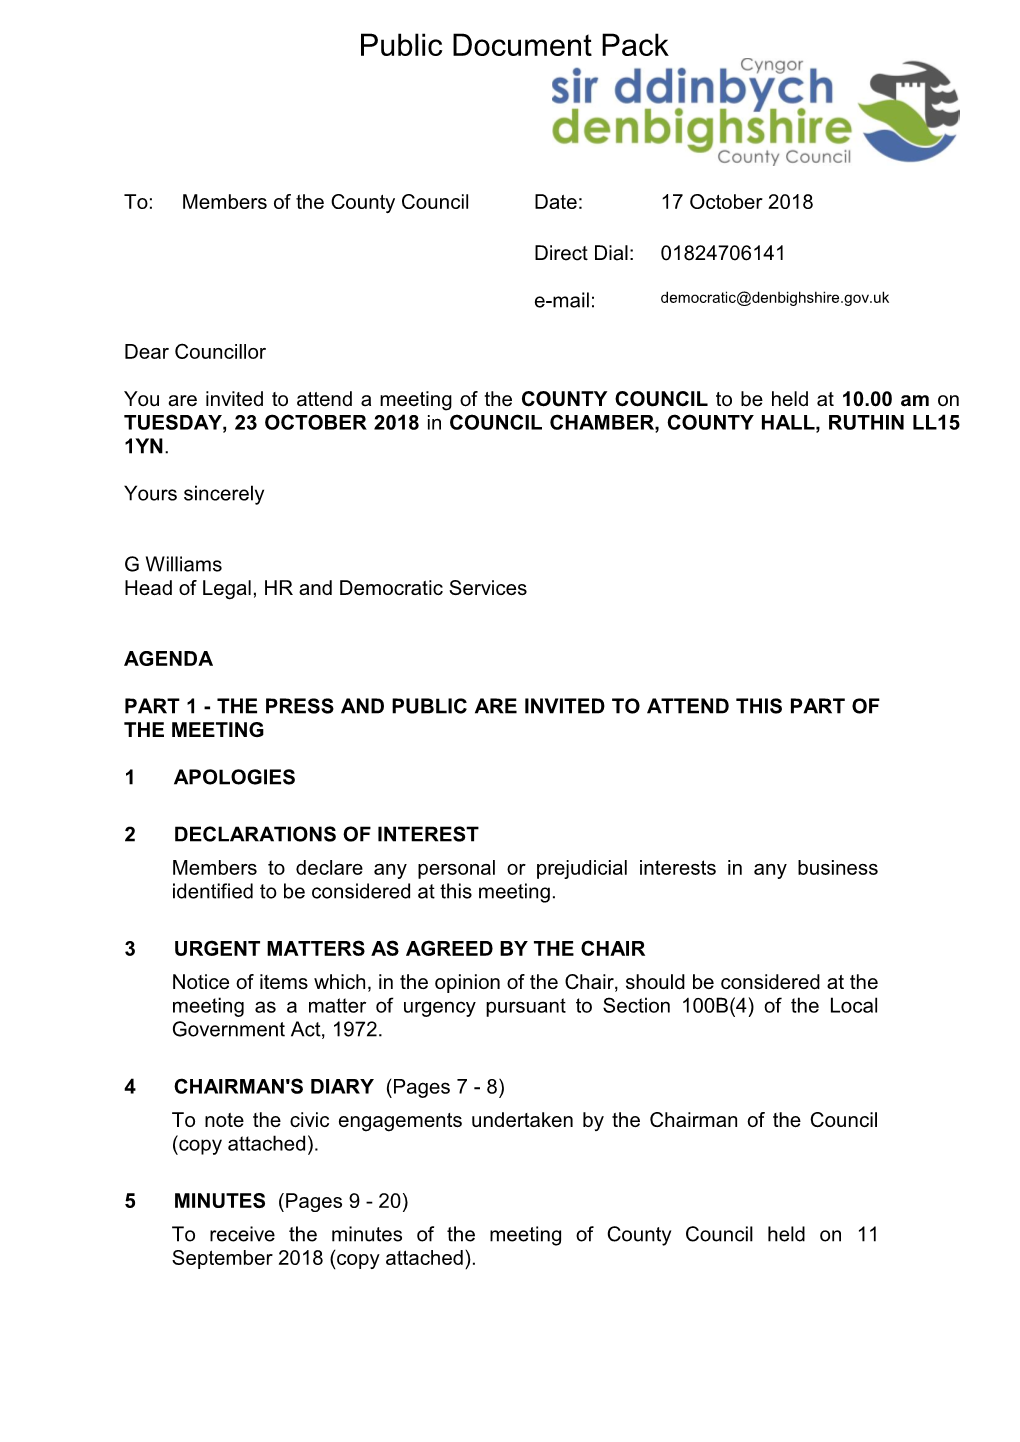 (Public Pack)Agenda Document for County Council, 23/10/2018 10:00